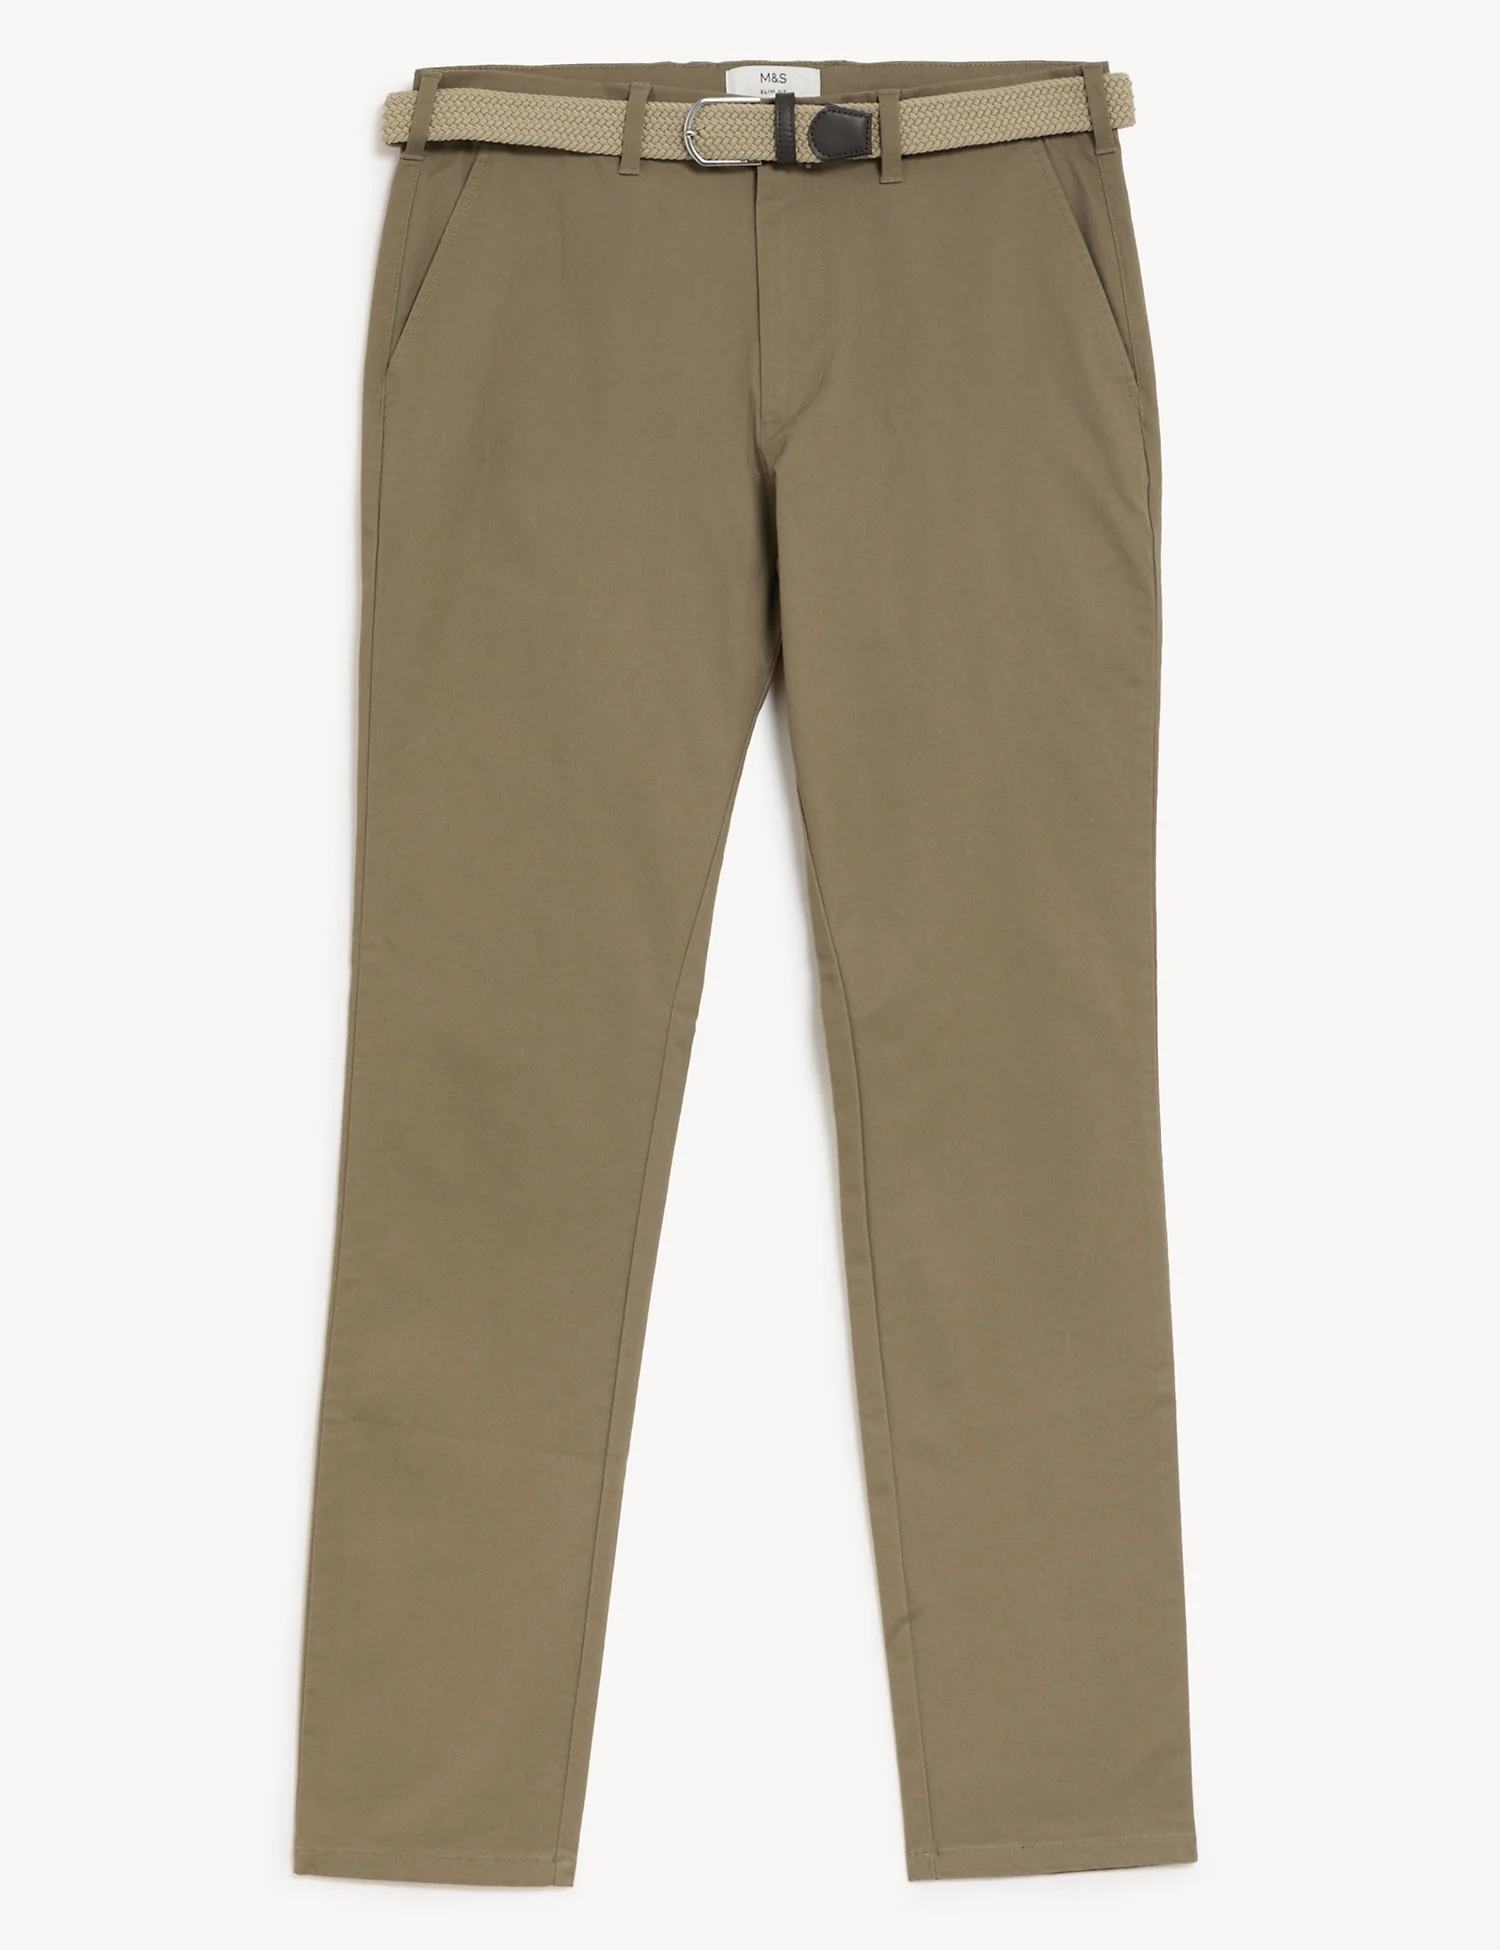 Slim Fit Belted Stretch Chinos ₱2,450.00 now P2,082.50.jpg